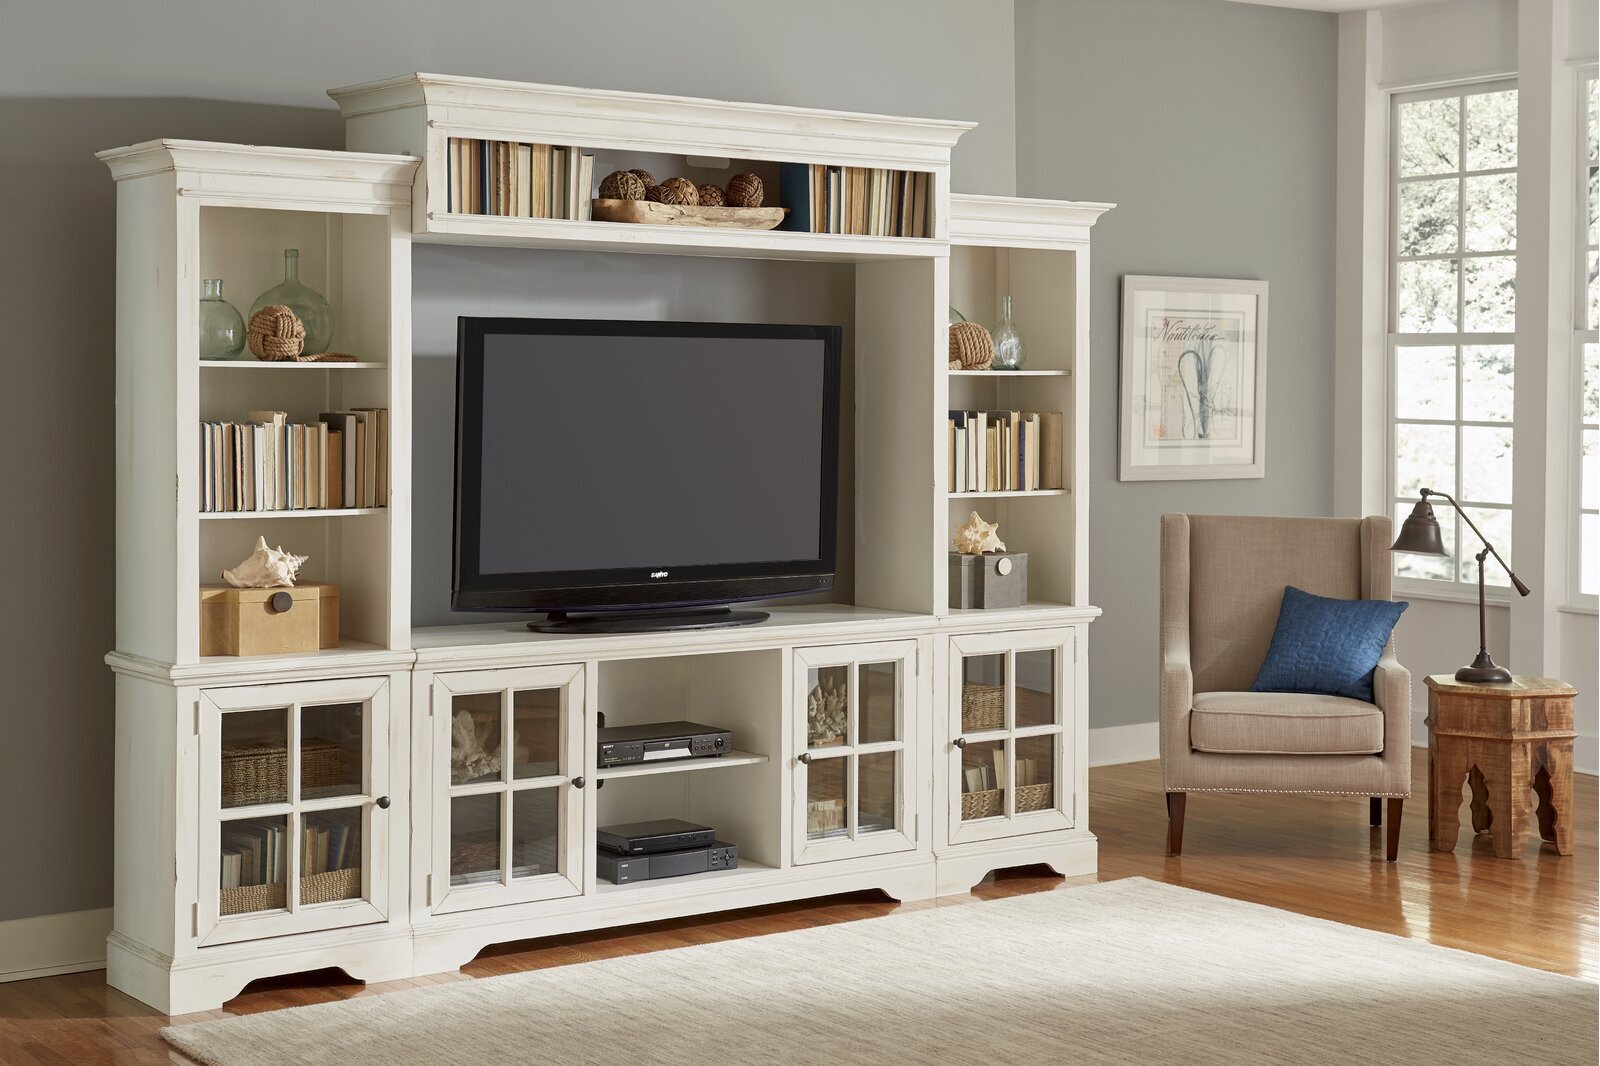 Entertainment Center With Interior Glass Cabinets